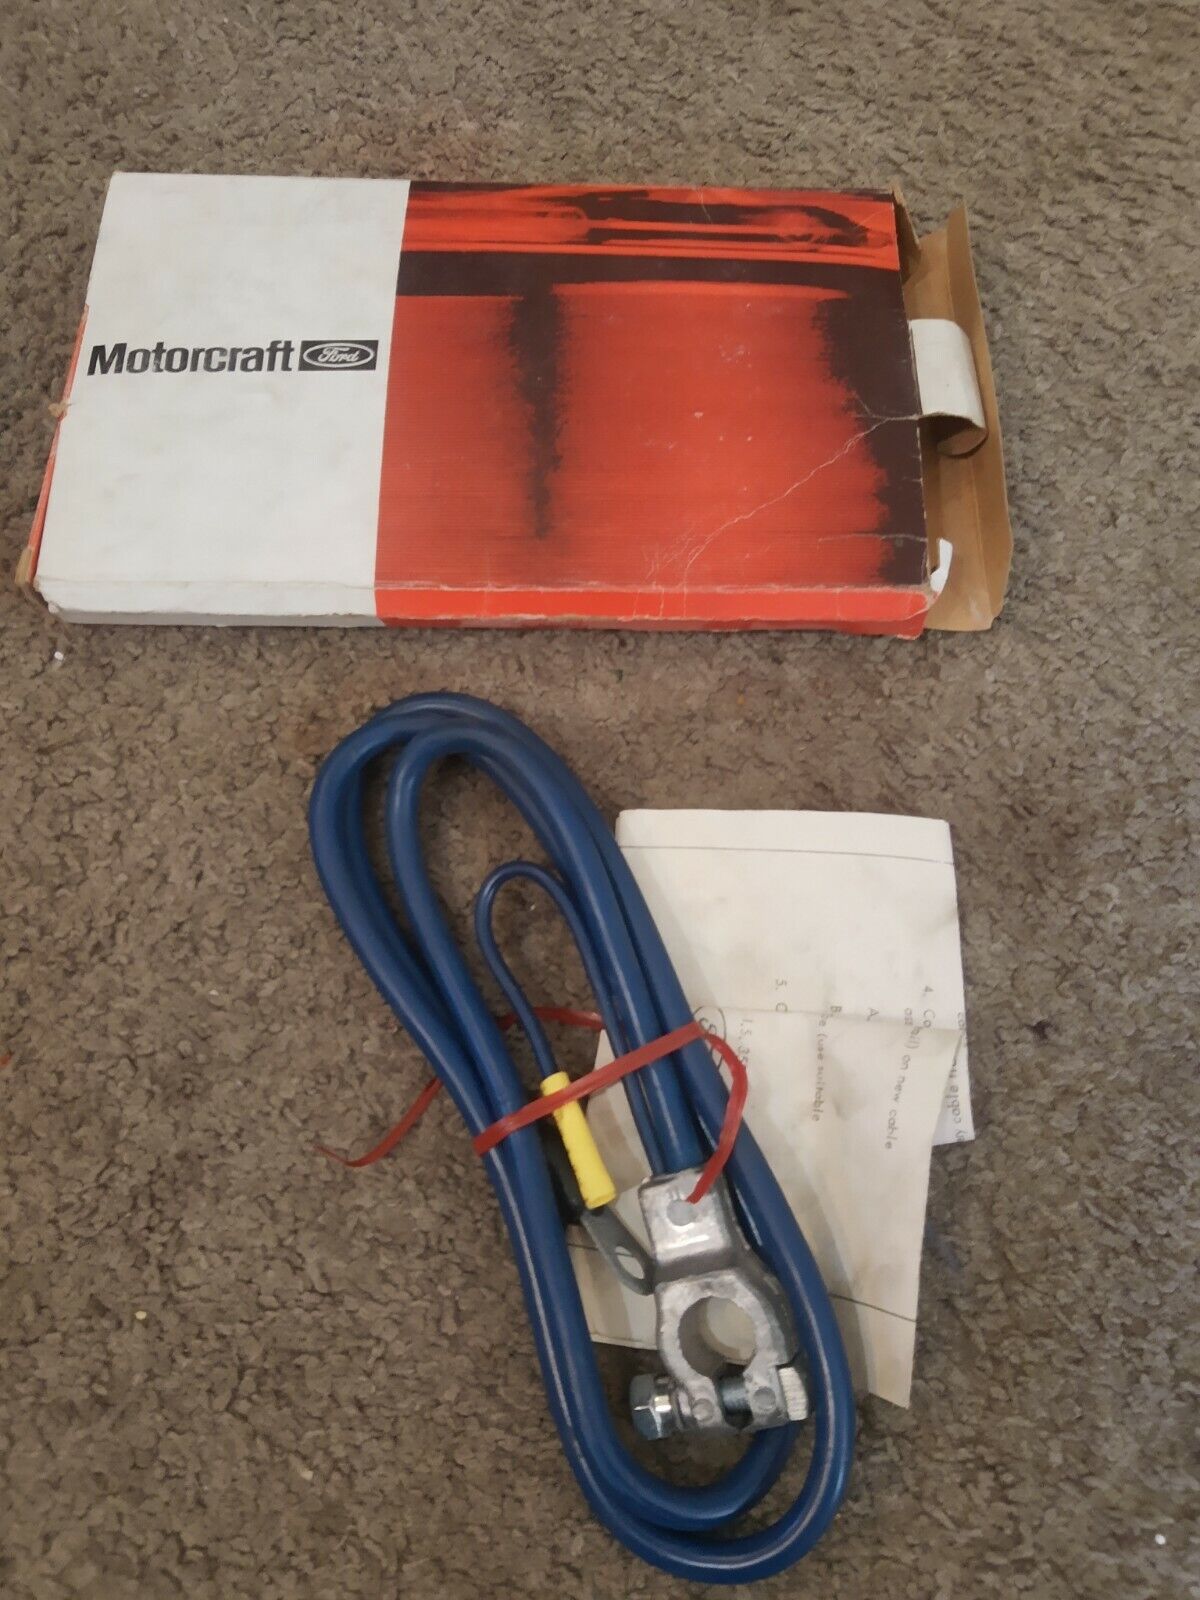 OEM NOS FORD Motorcraft Battery Terminal Cable Kit Pinto # 7534 / D1PZ-14300-ab